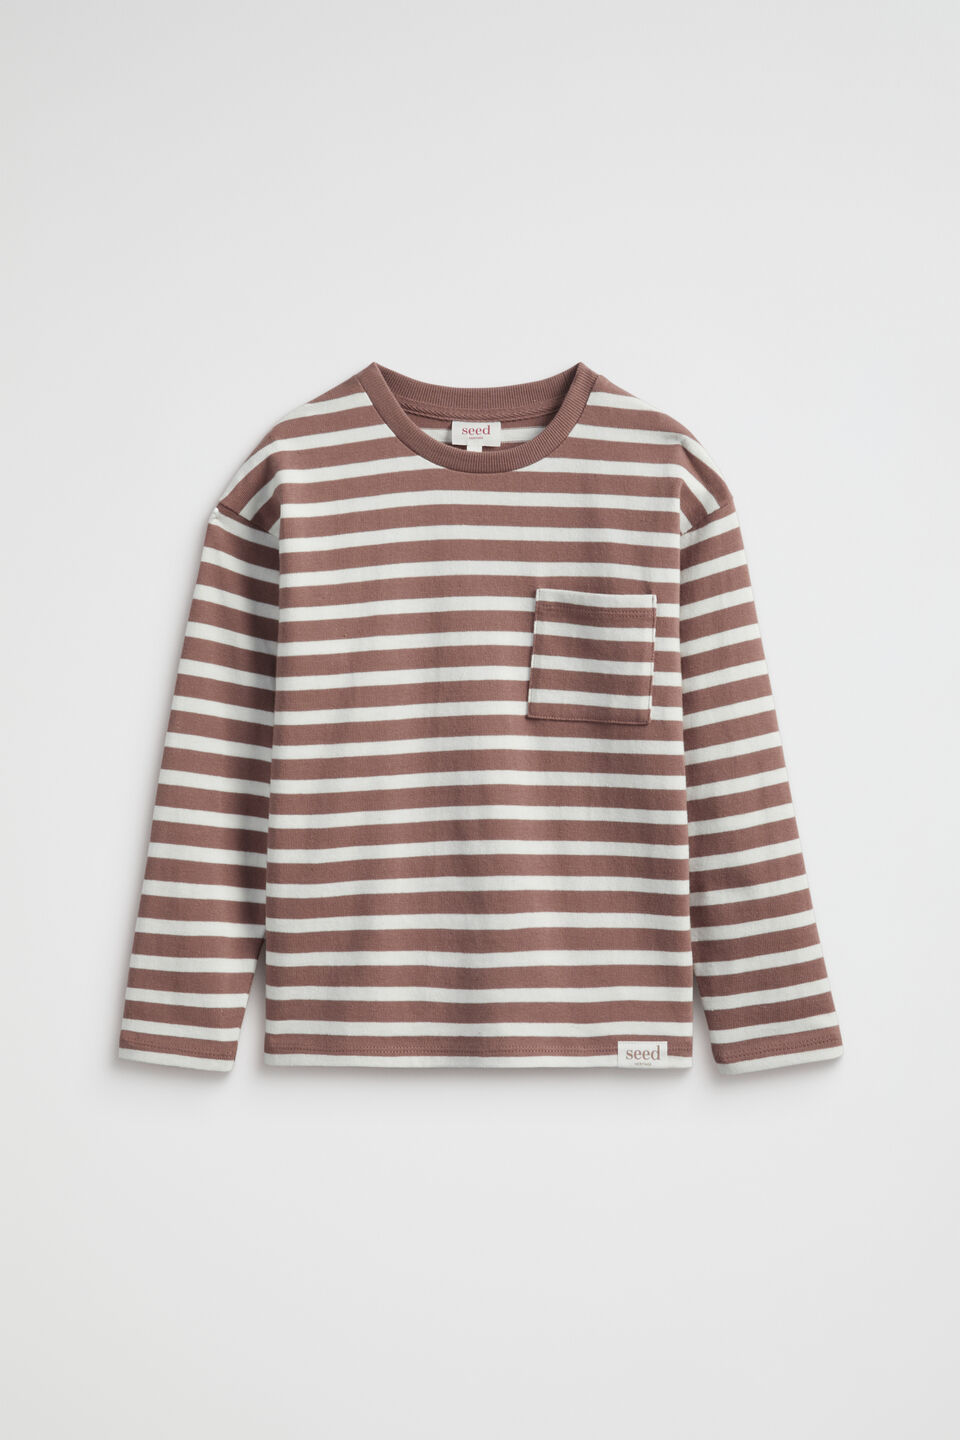 Core Rugby Pocket Tee  Cocoa Stripe